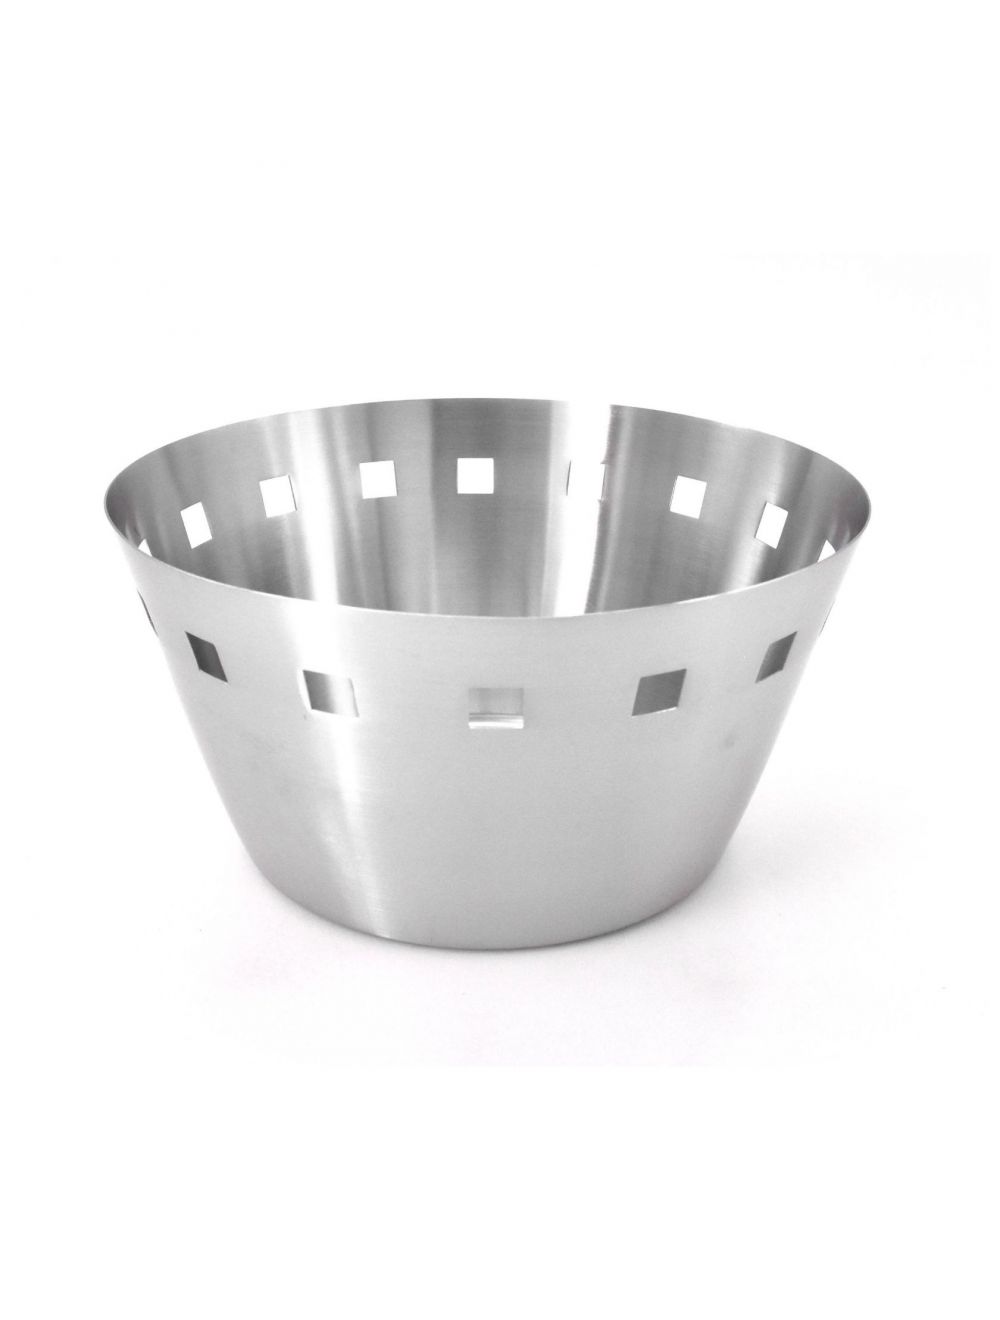 Steel Bread Basket With Square Shaped Hole Design